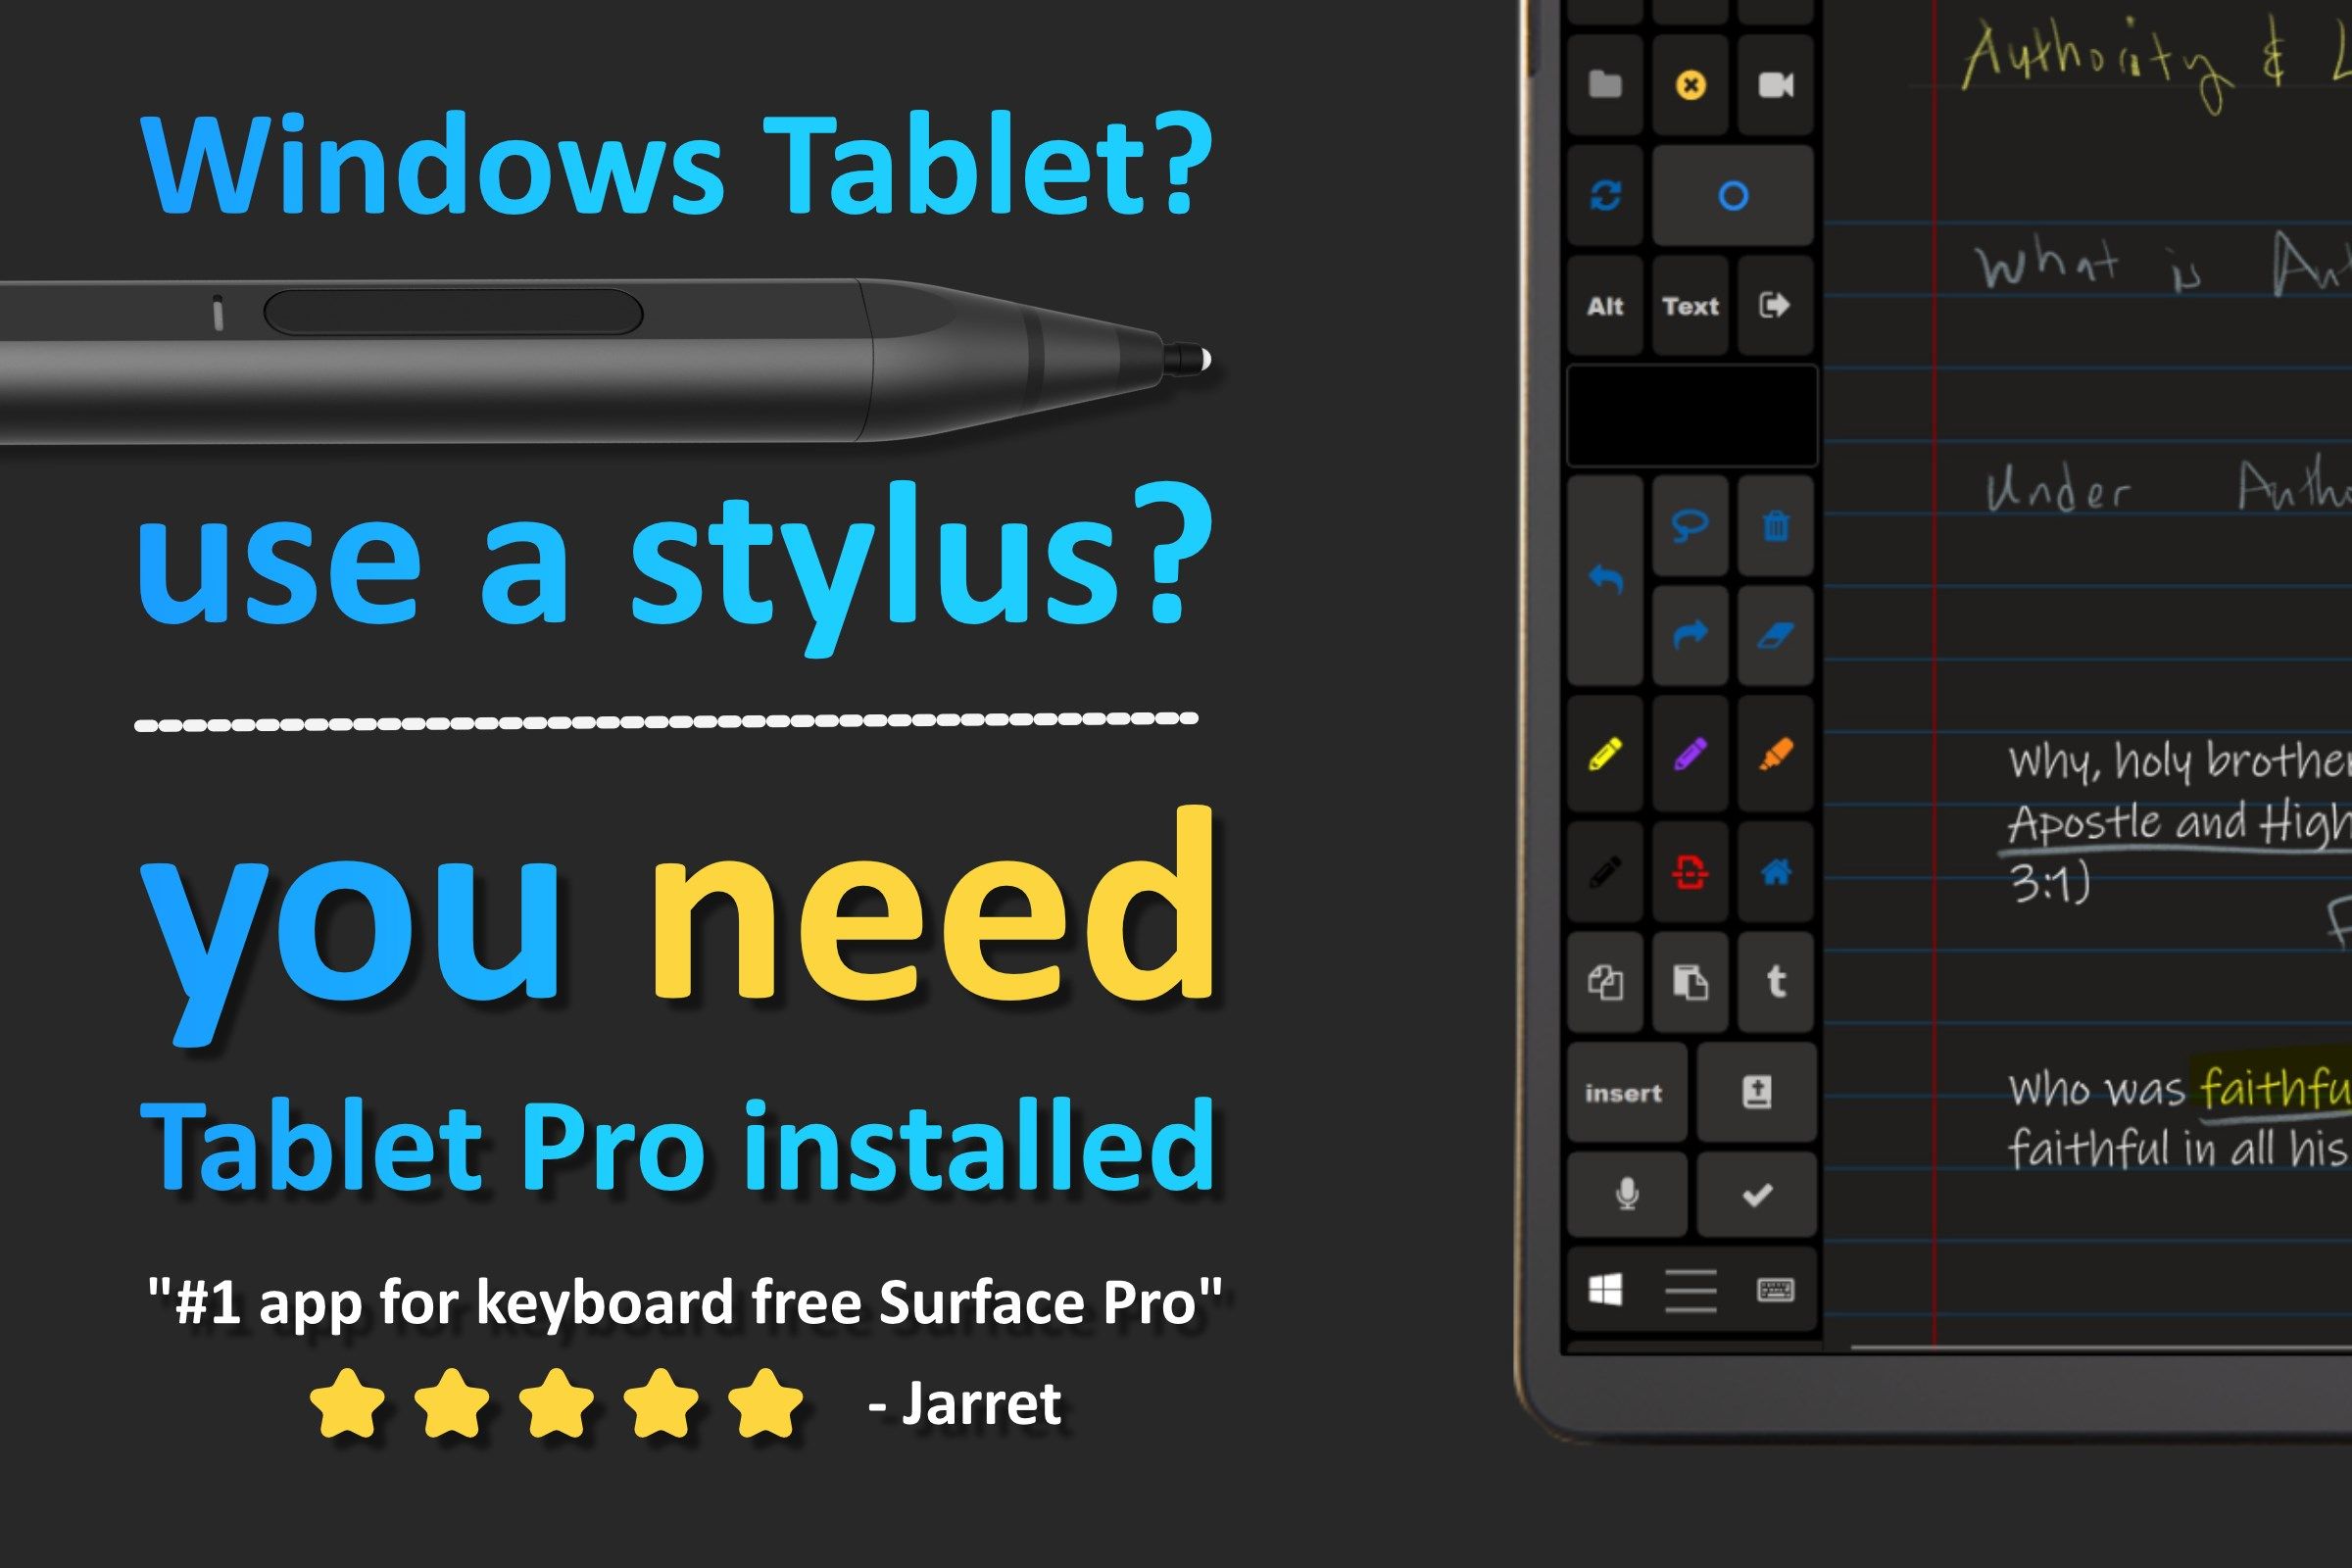 Microsoft Windows Tablet advanced touch controls, touch buttons, virtual trackpad, virtual gamepad, use desktop applications with all your keyboard shortcuts onscreen. (download this app and the desktop app at www.tabletpro.com)